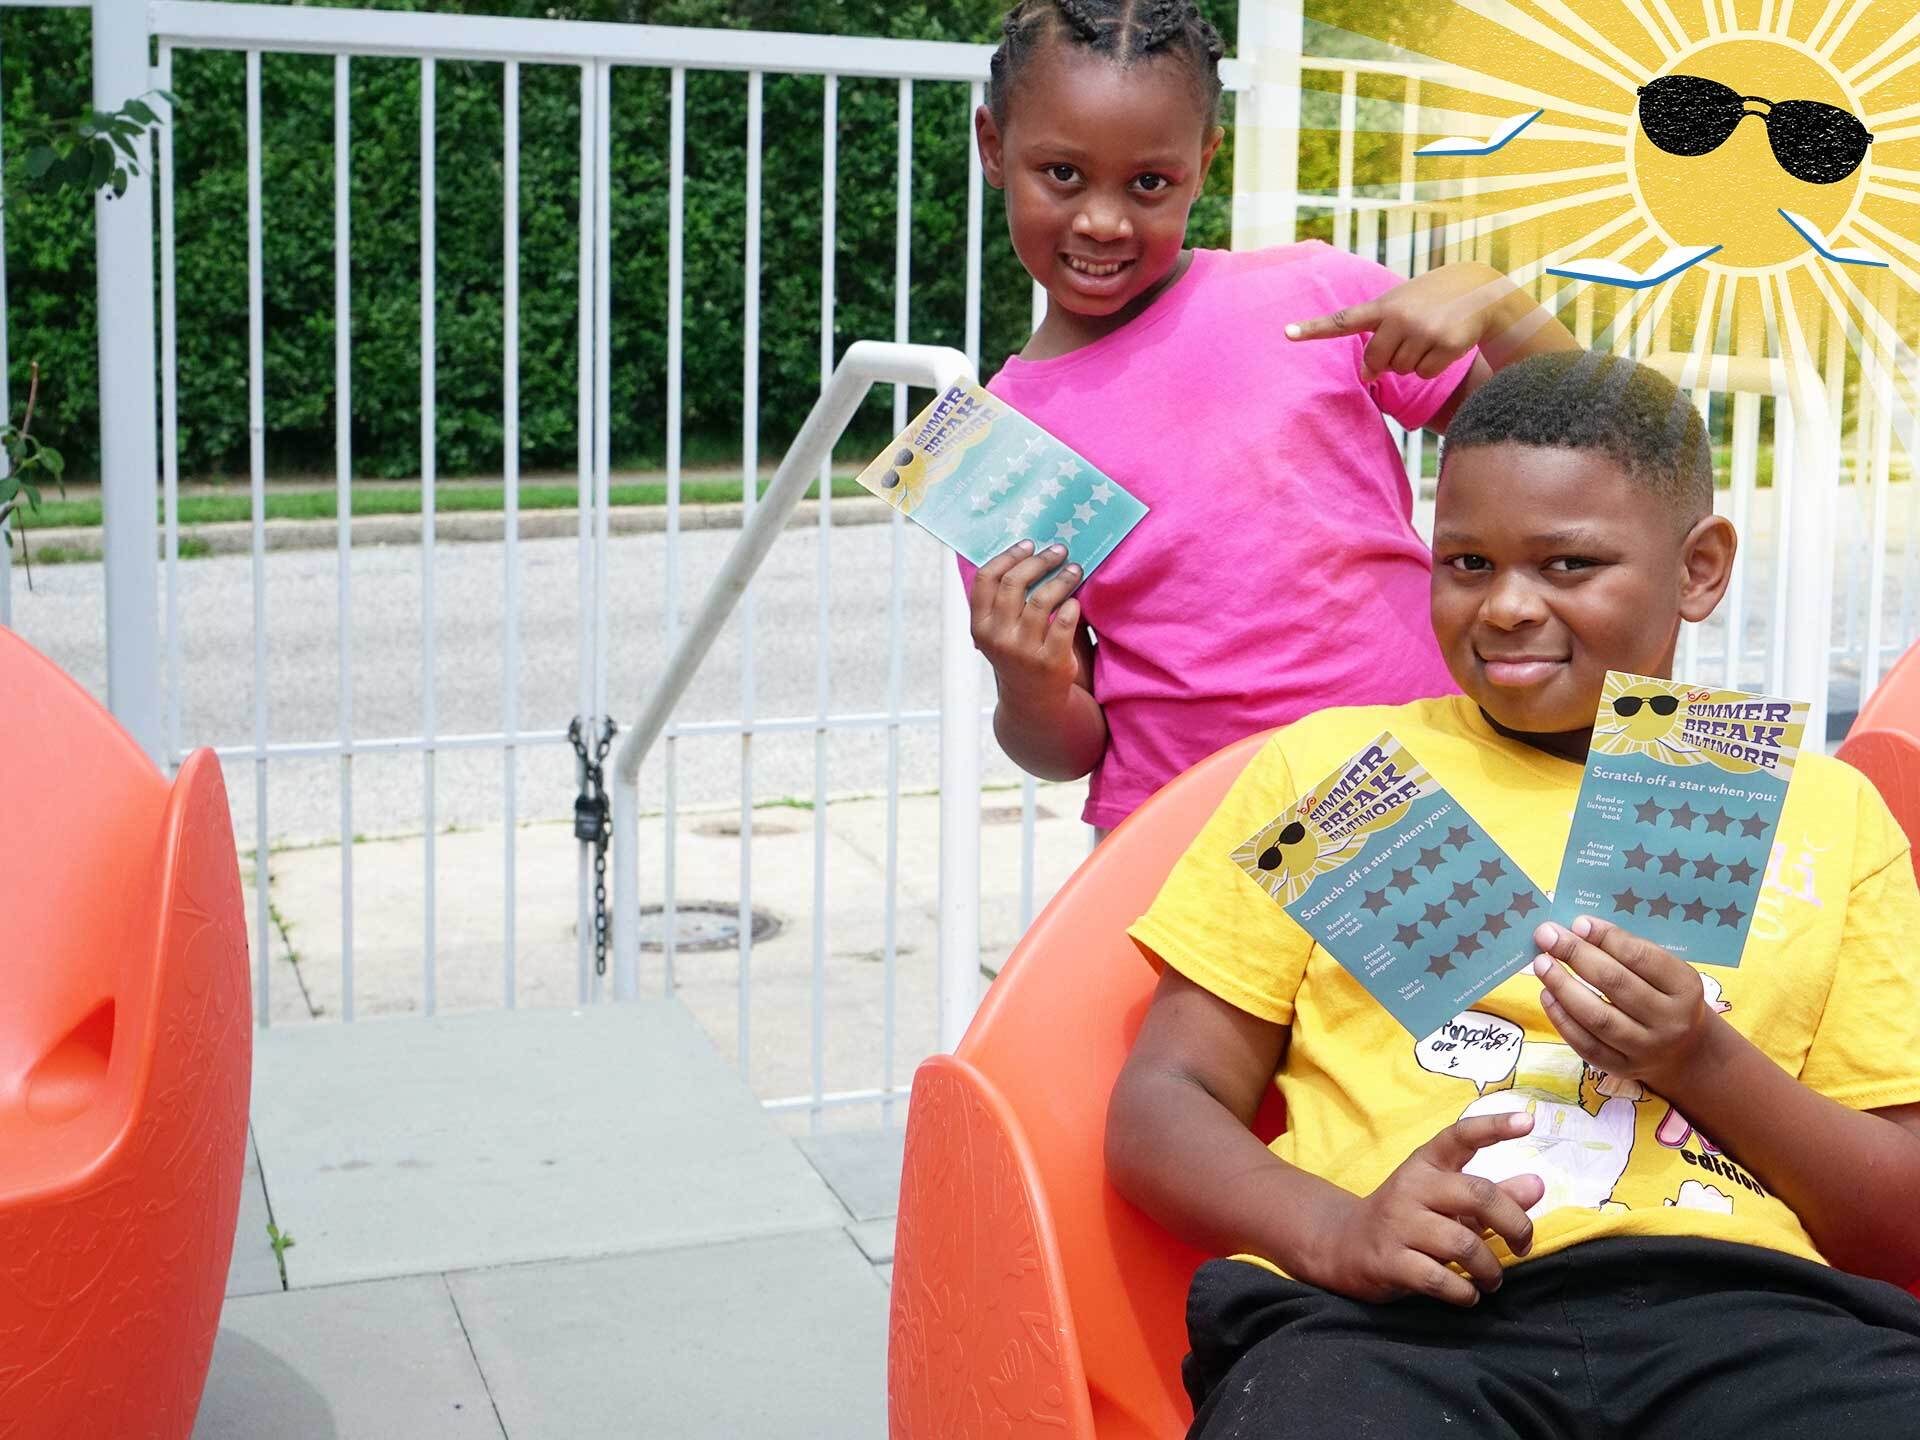 Summer Break Baltimore kids with scratch-off cards and  sun logo and flying books